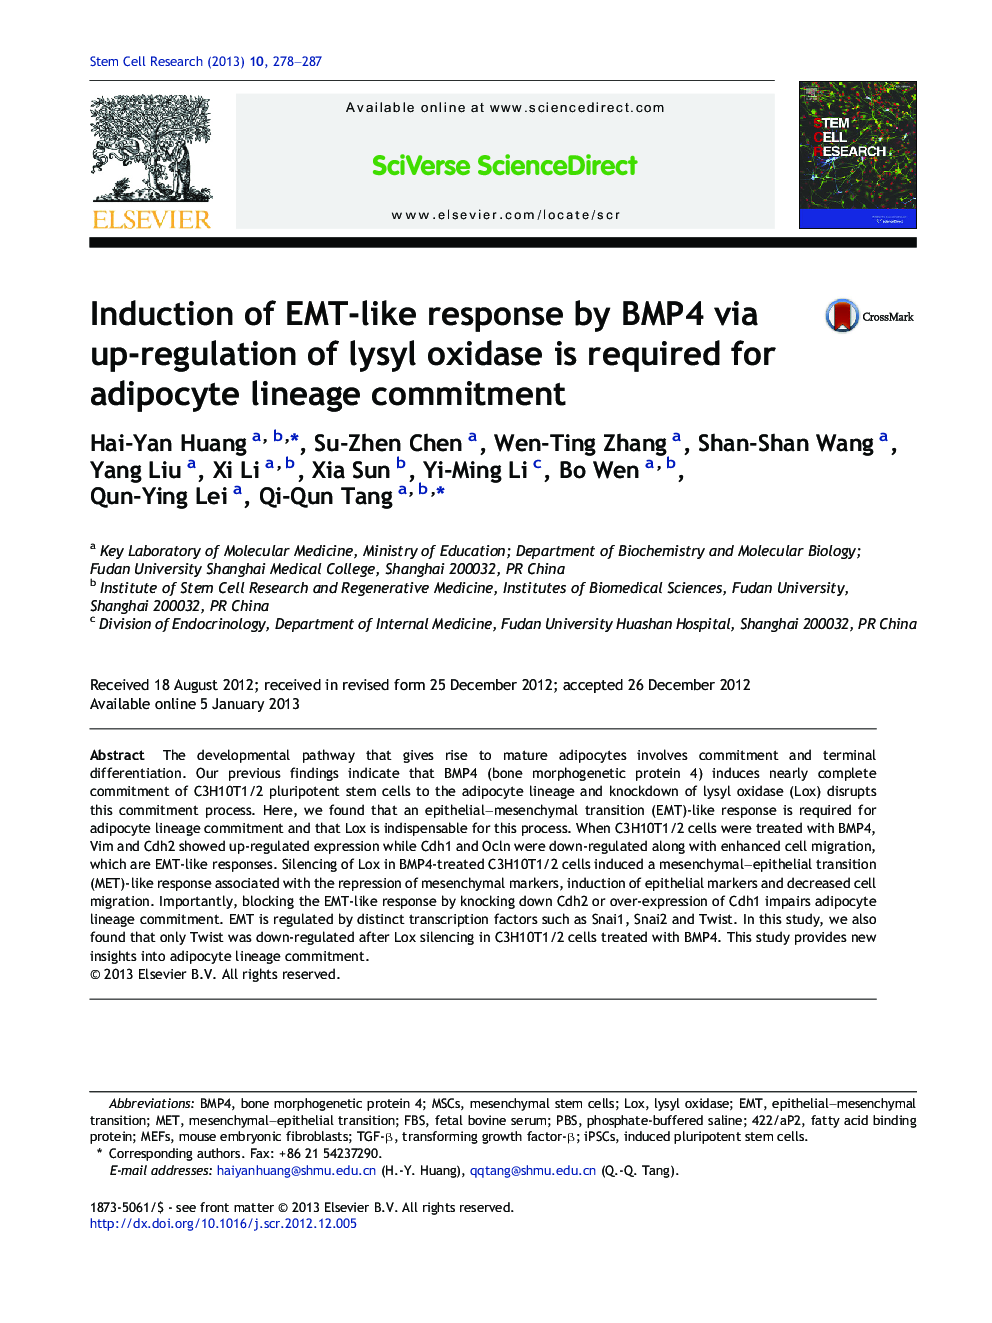 Induction of EMT-like response by BMP4 via up-regulation of lysyl oxidase is required for adipocyte lineage commitment